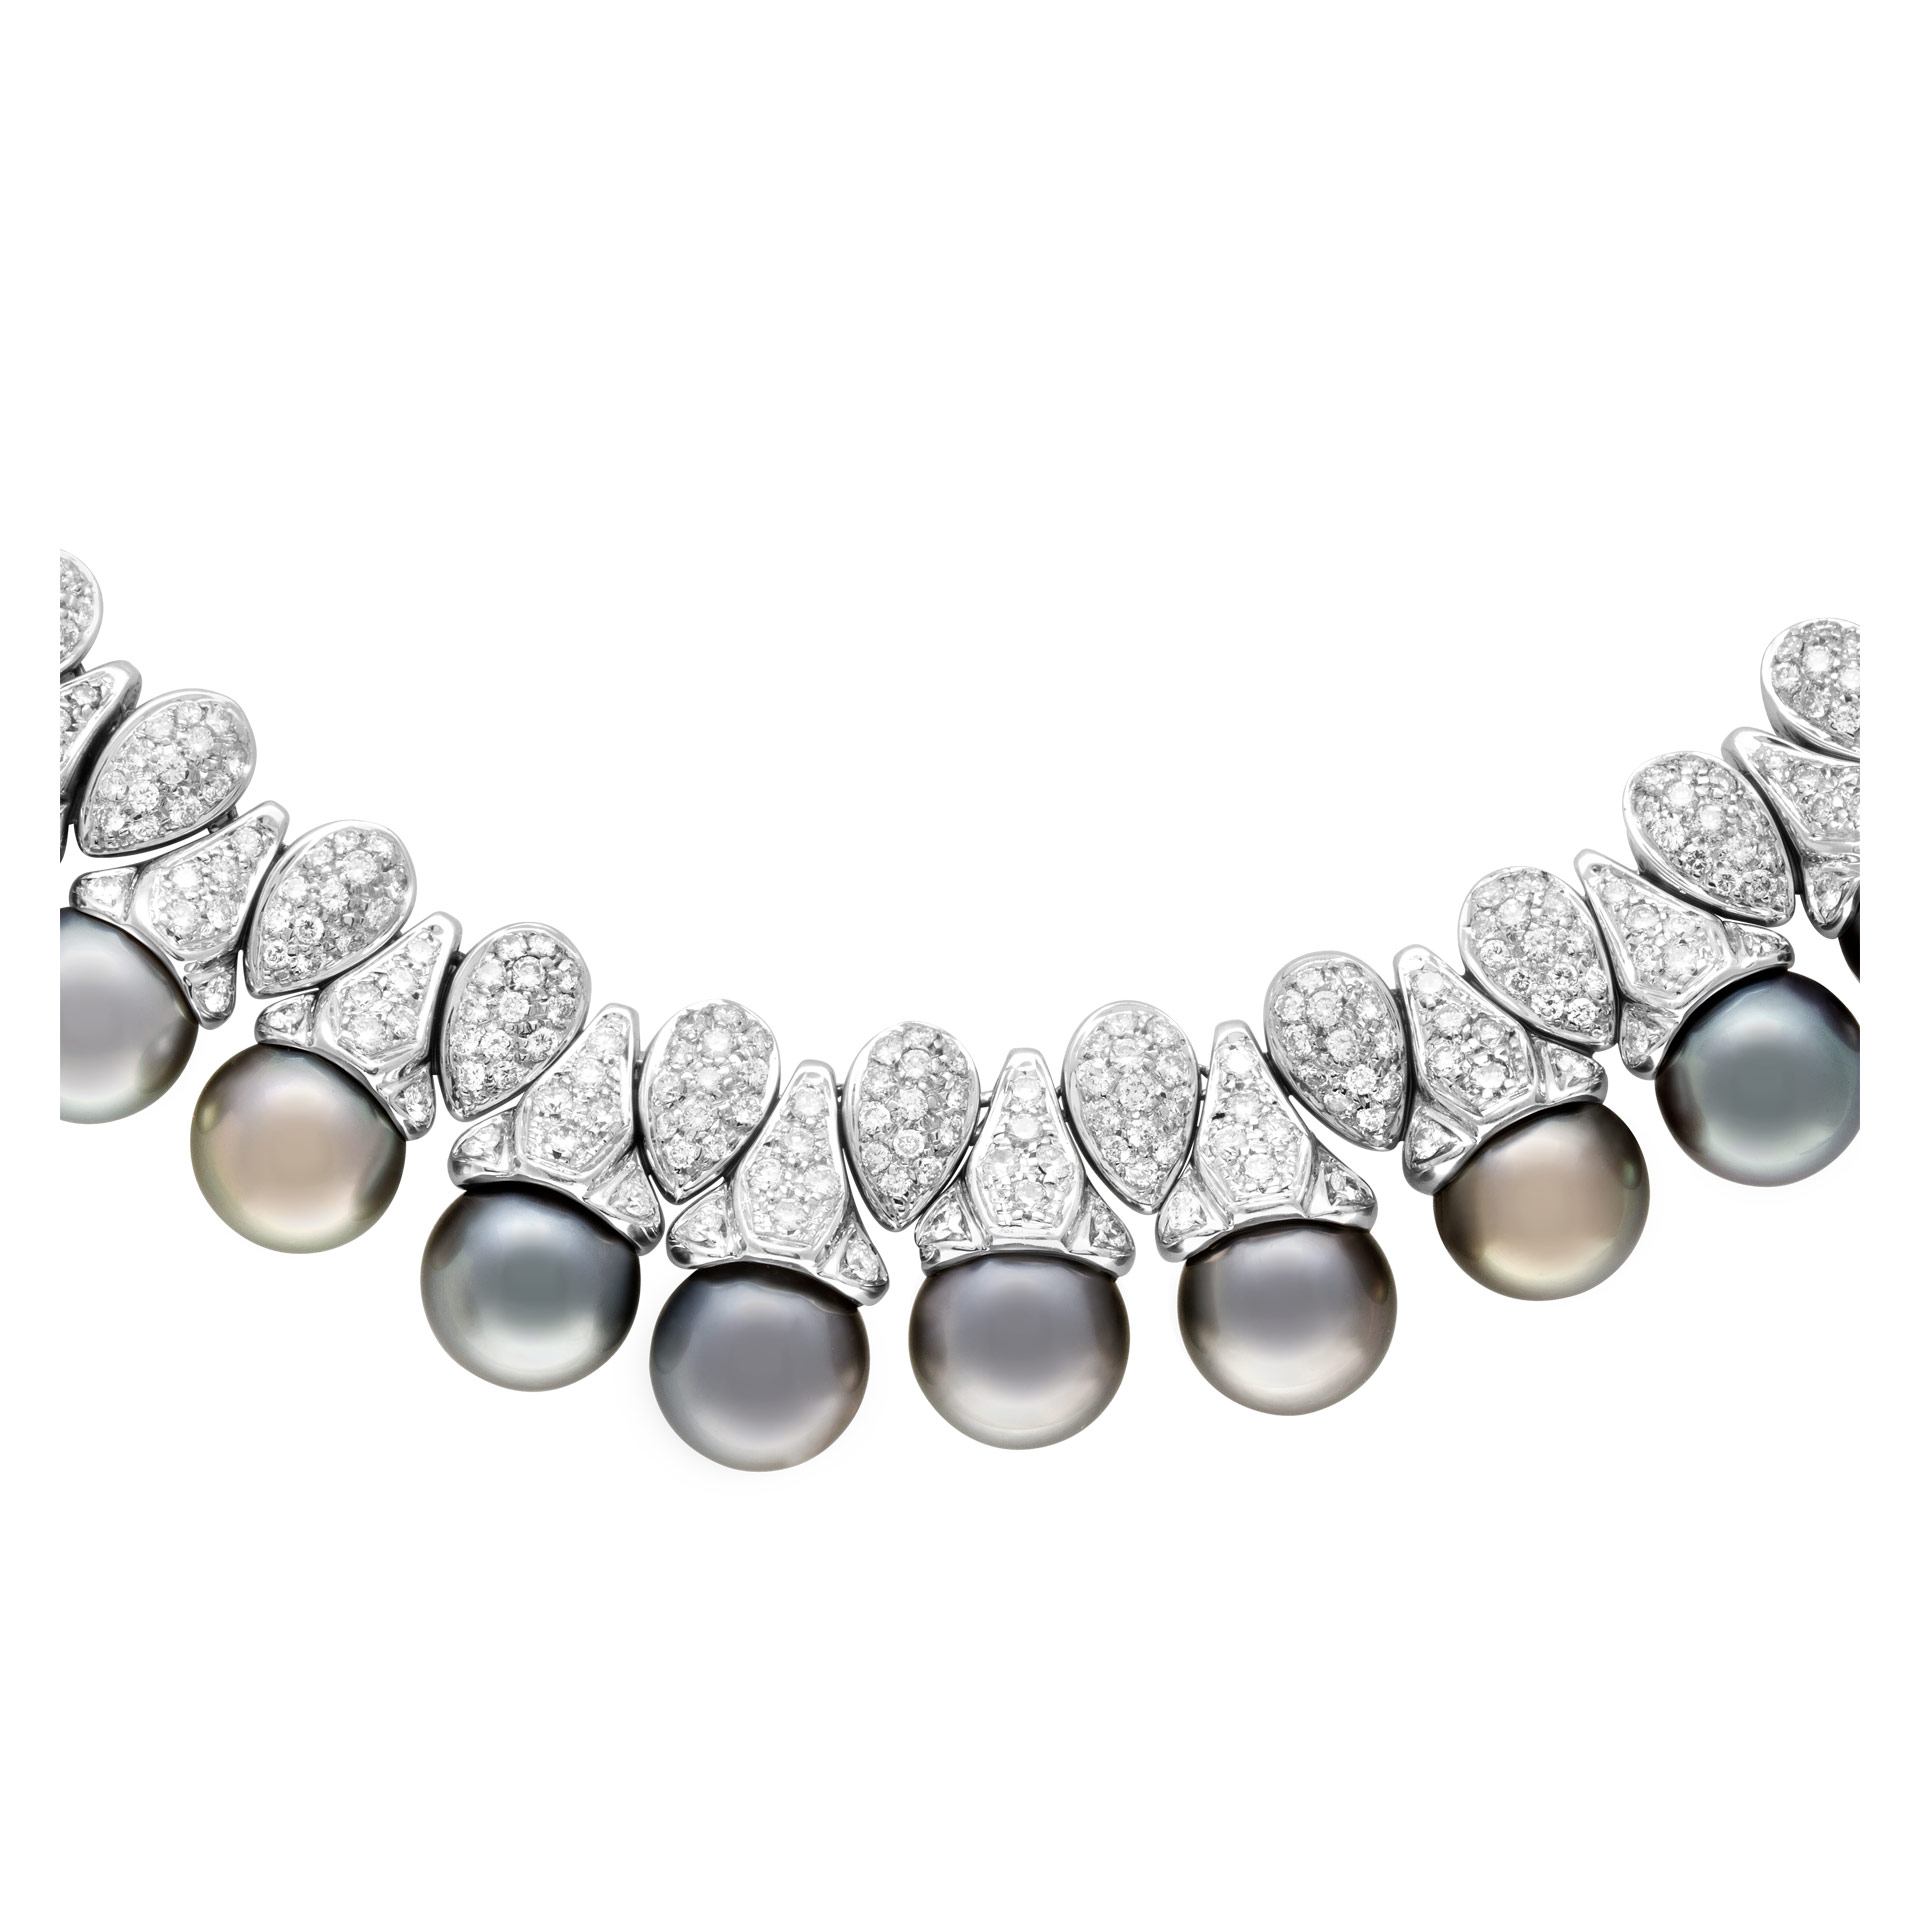 Black pearl necklace with over 8.5 carats (G-H color, VS clarity) in diamonds image 1